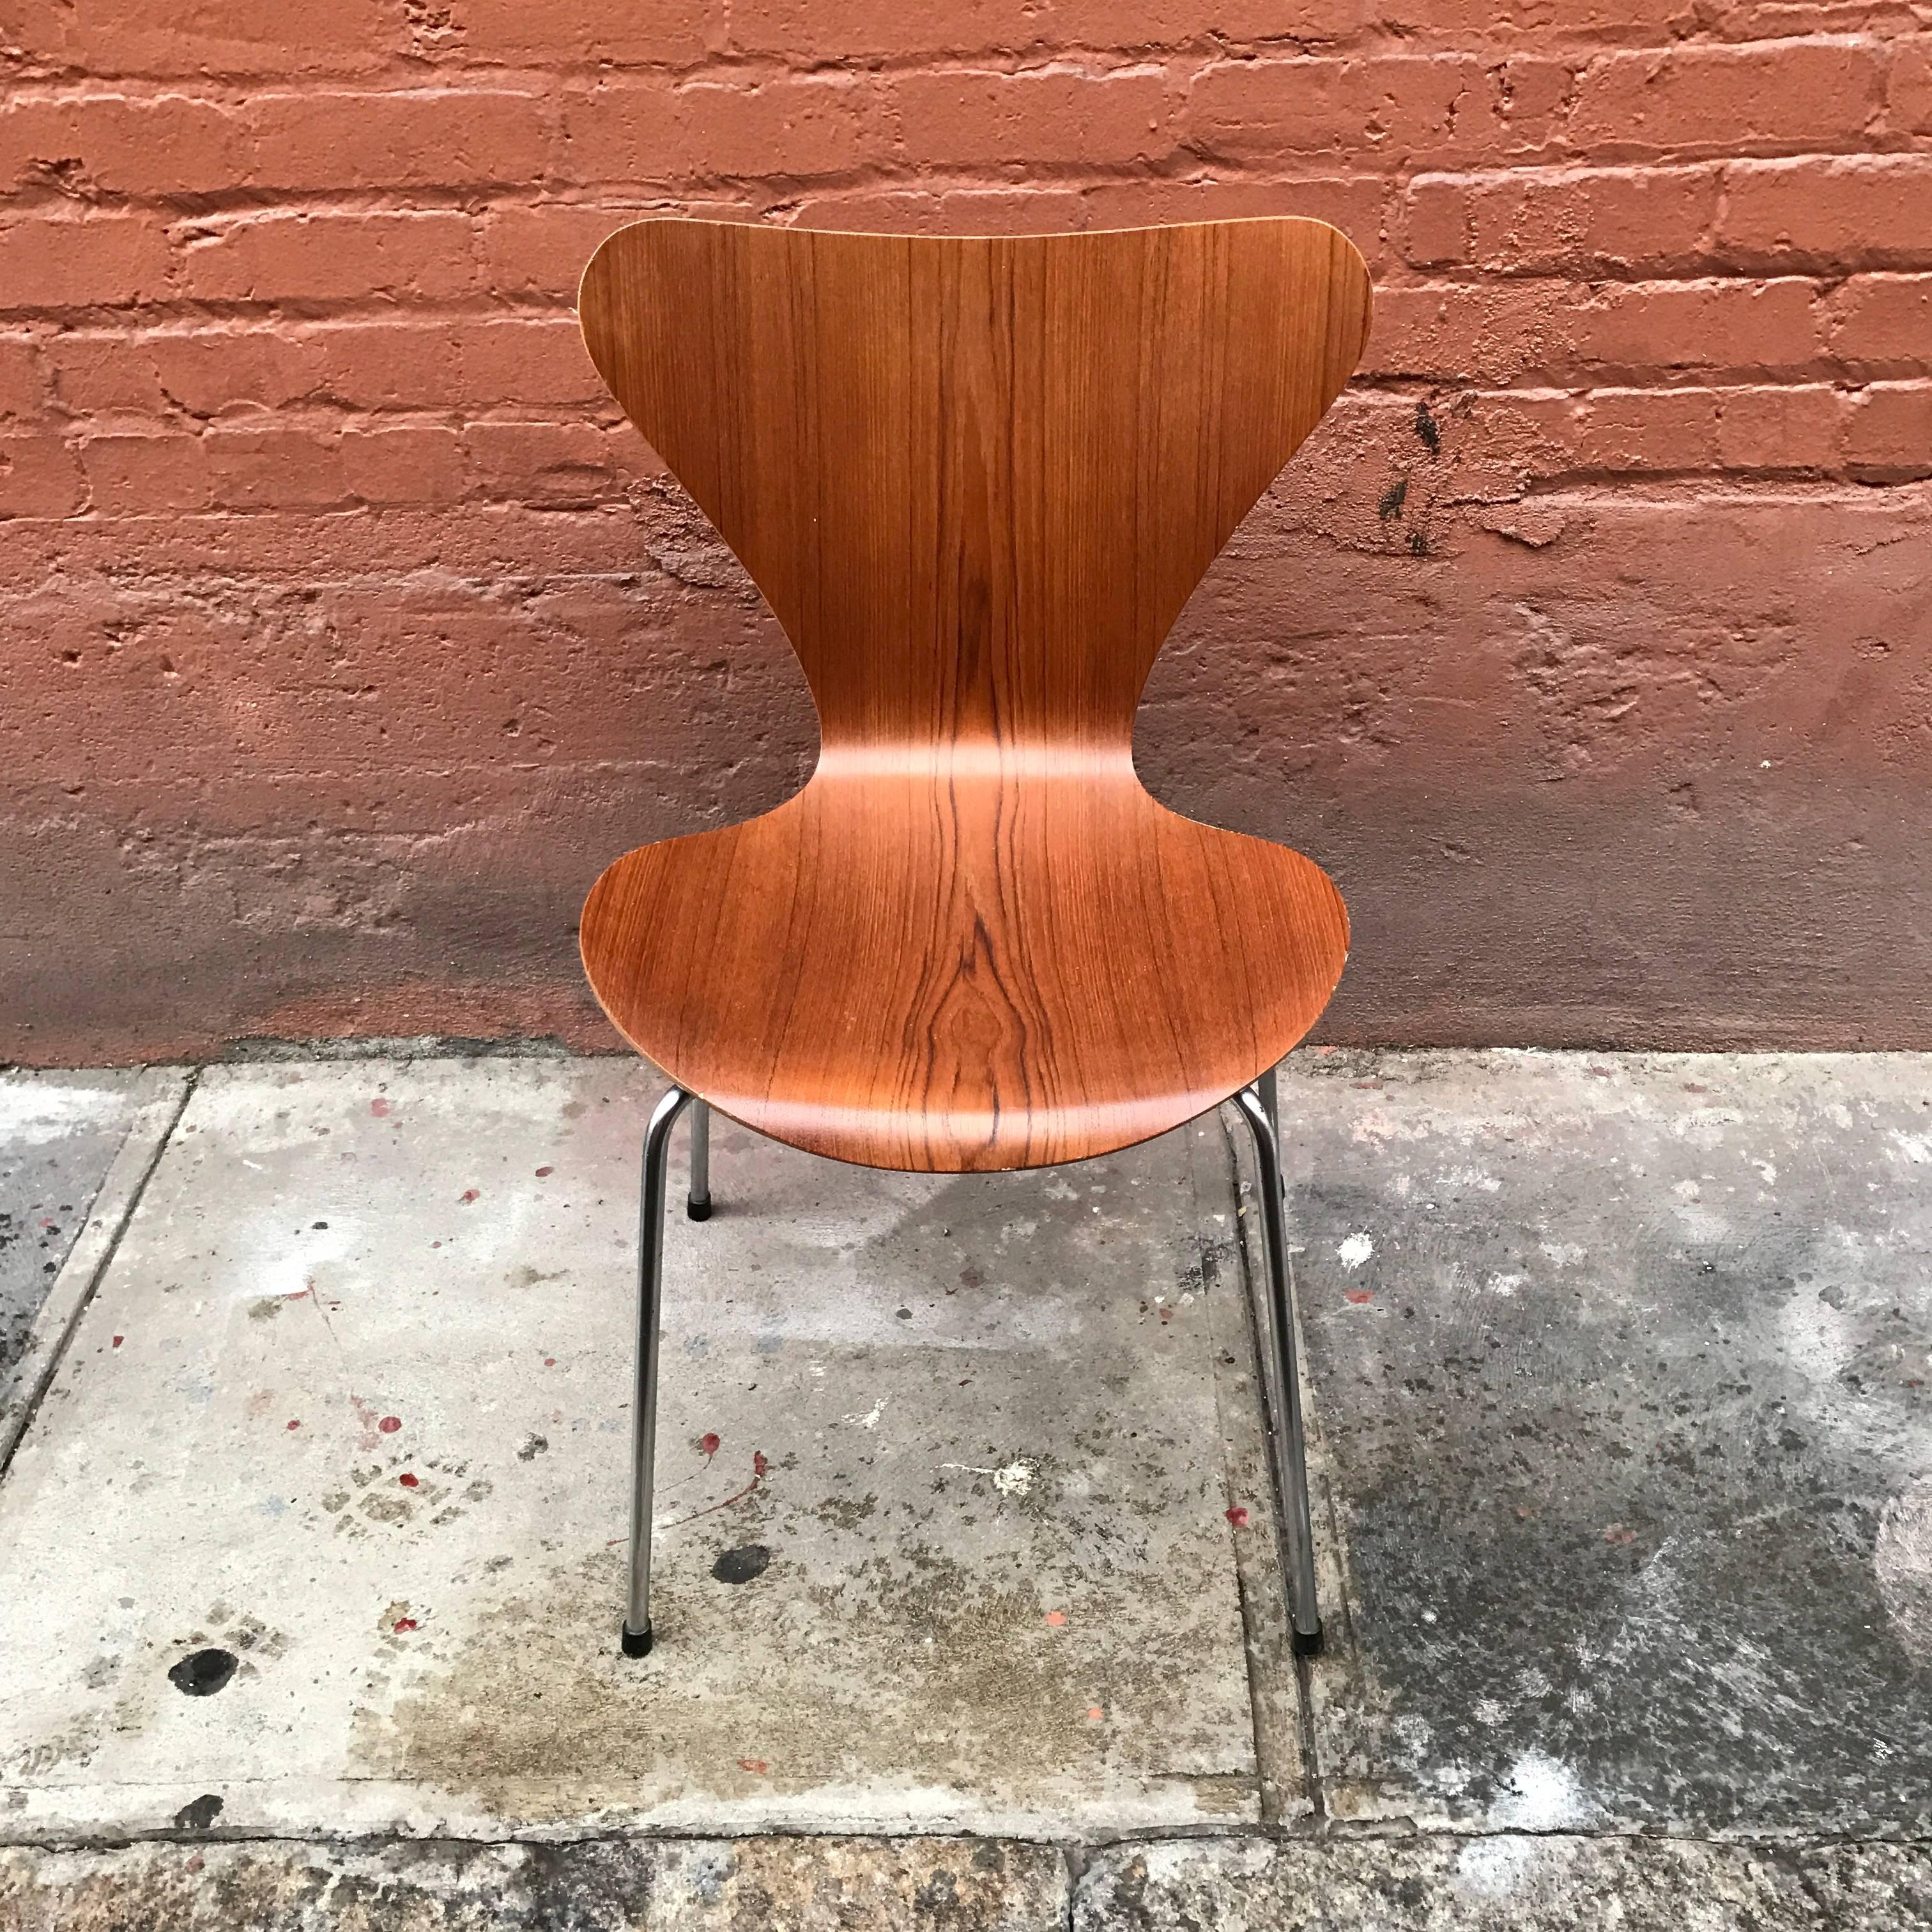 Arne Jacobsen teak series seven side chair, designed in 1955, this is a 1960s vintage model. It's uses a technique through which plywood is bent in three dimensions. The base is a satin chrome with four legs. The teak has a very fugitive grain.